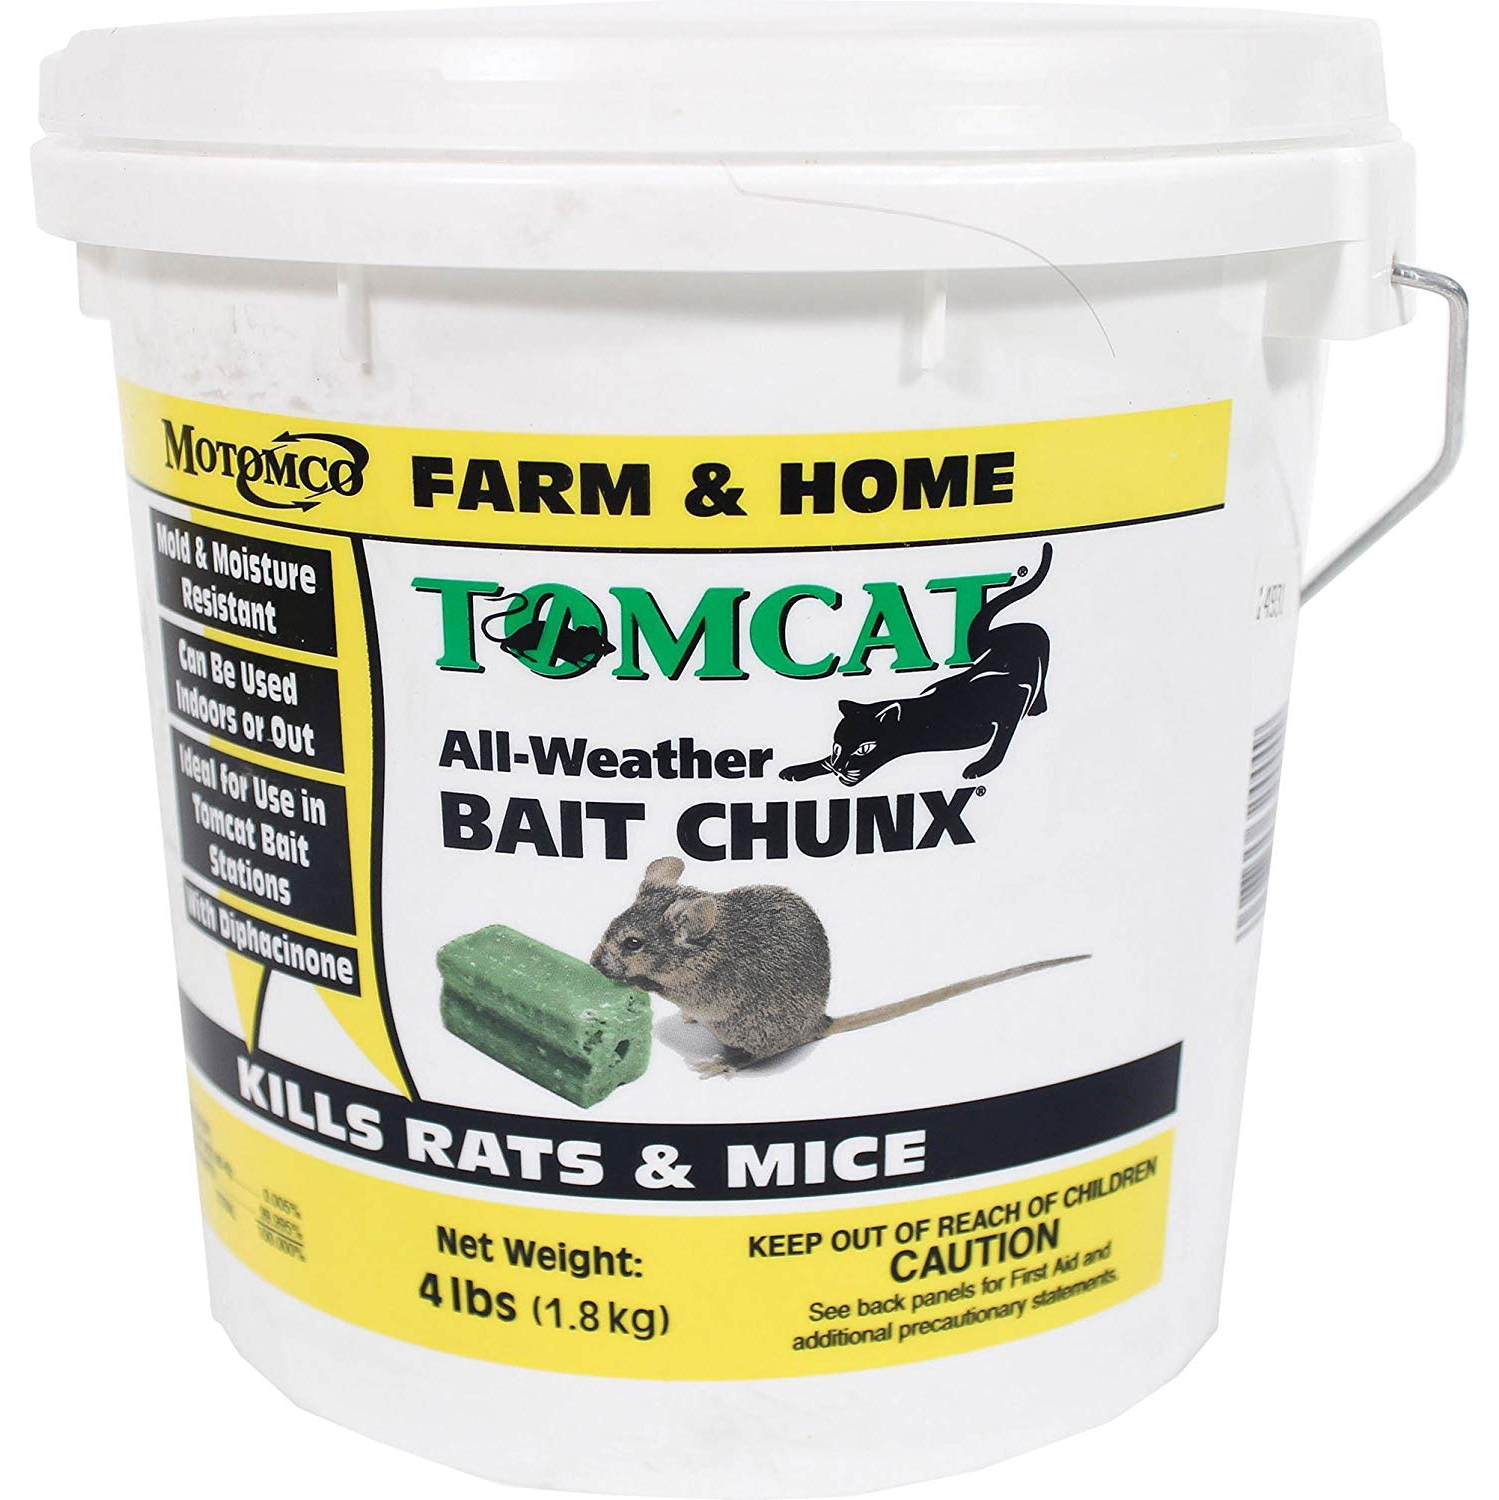 Motomco Rodent Tomcat All Weather Farm and Home rat mice rodent poison bait blocks 9lbs/4.1kg